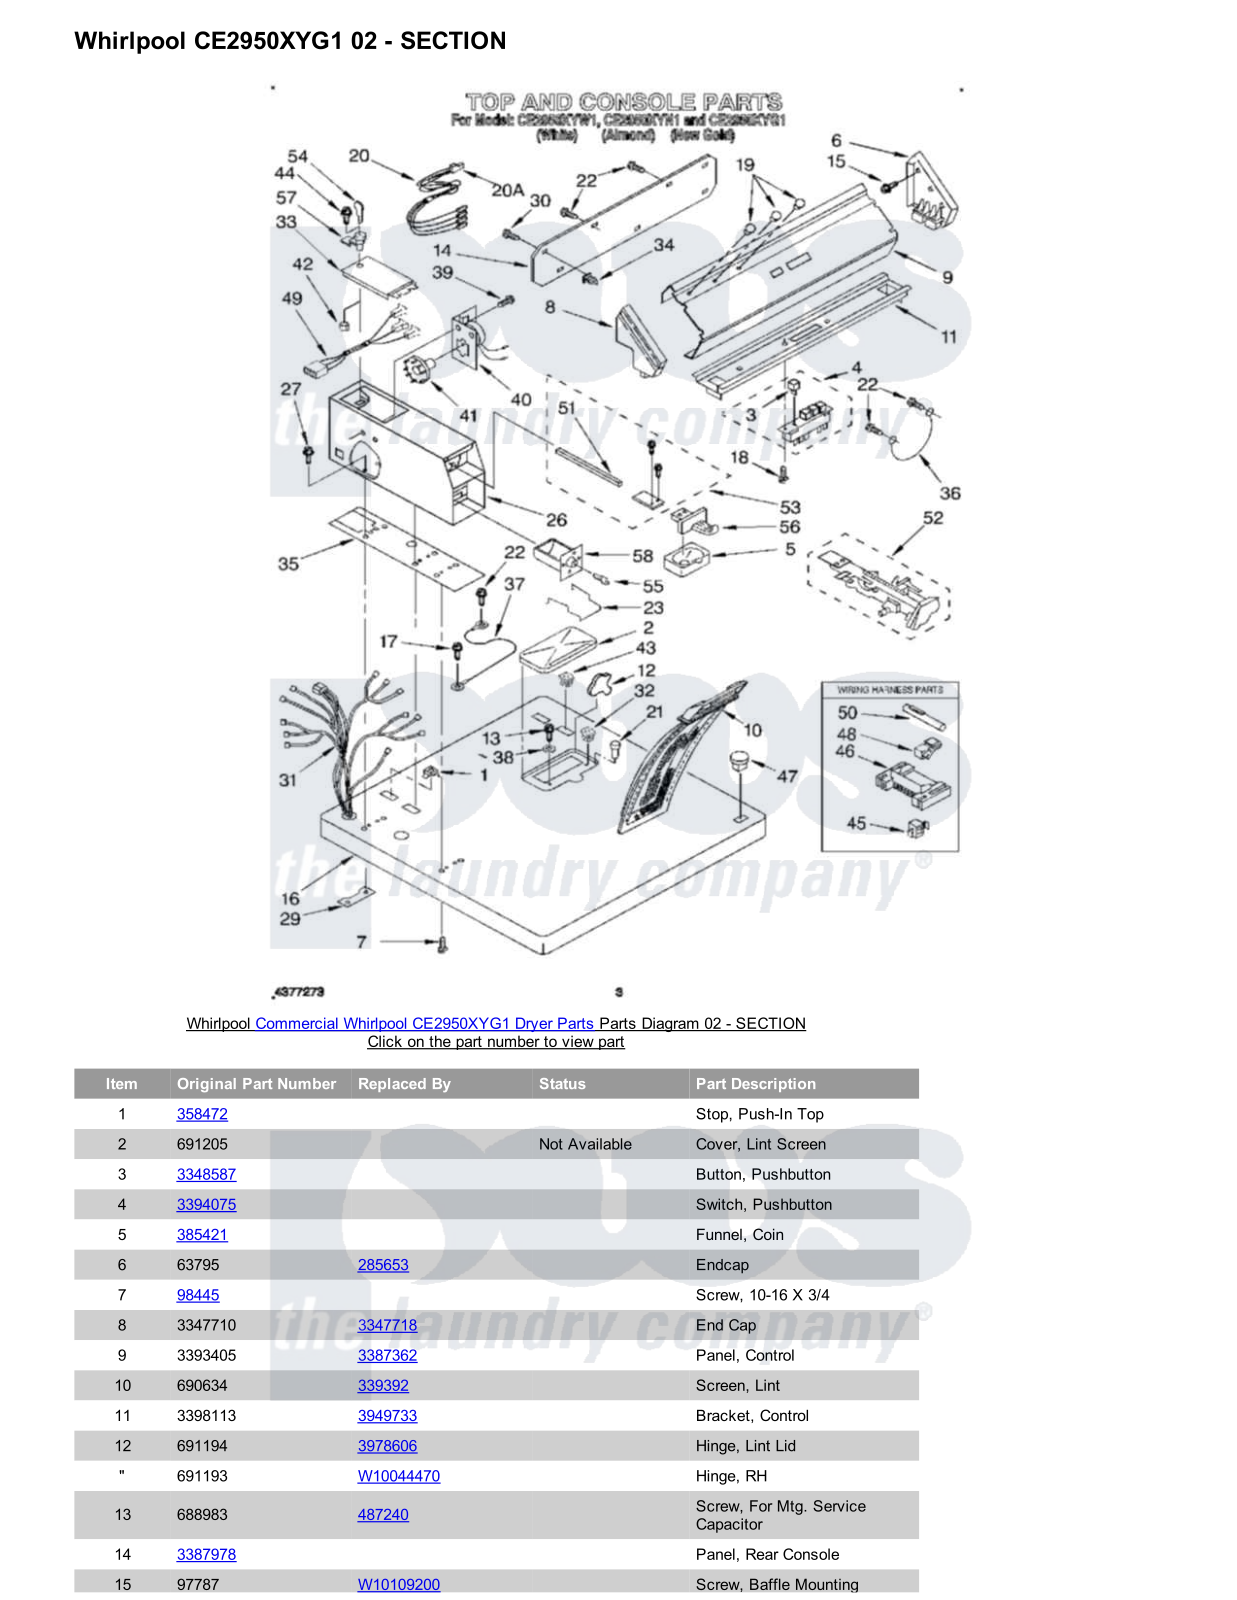 Whirlpool CE2950XYG1 Parts Diagram